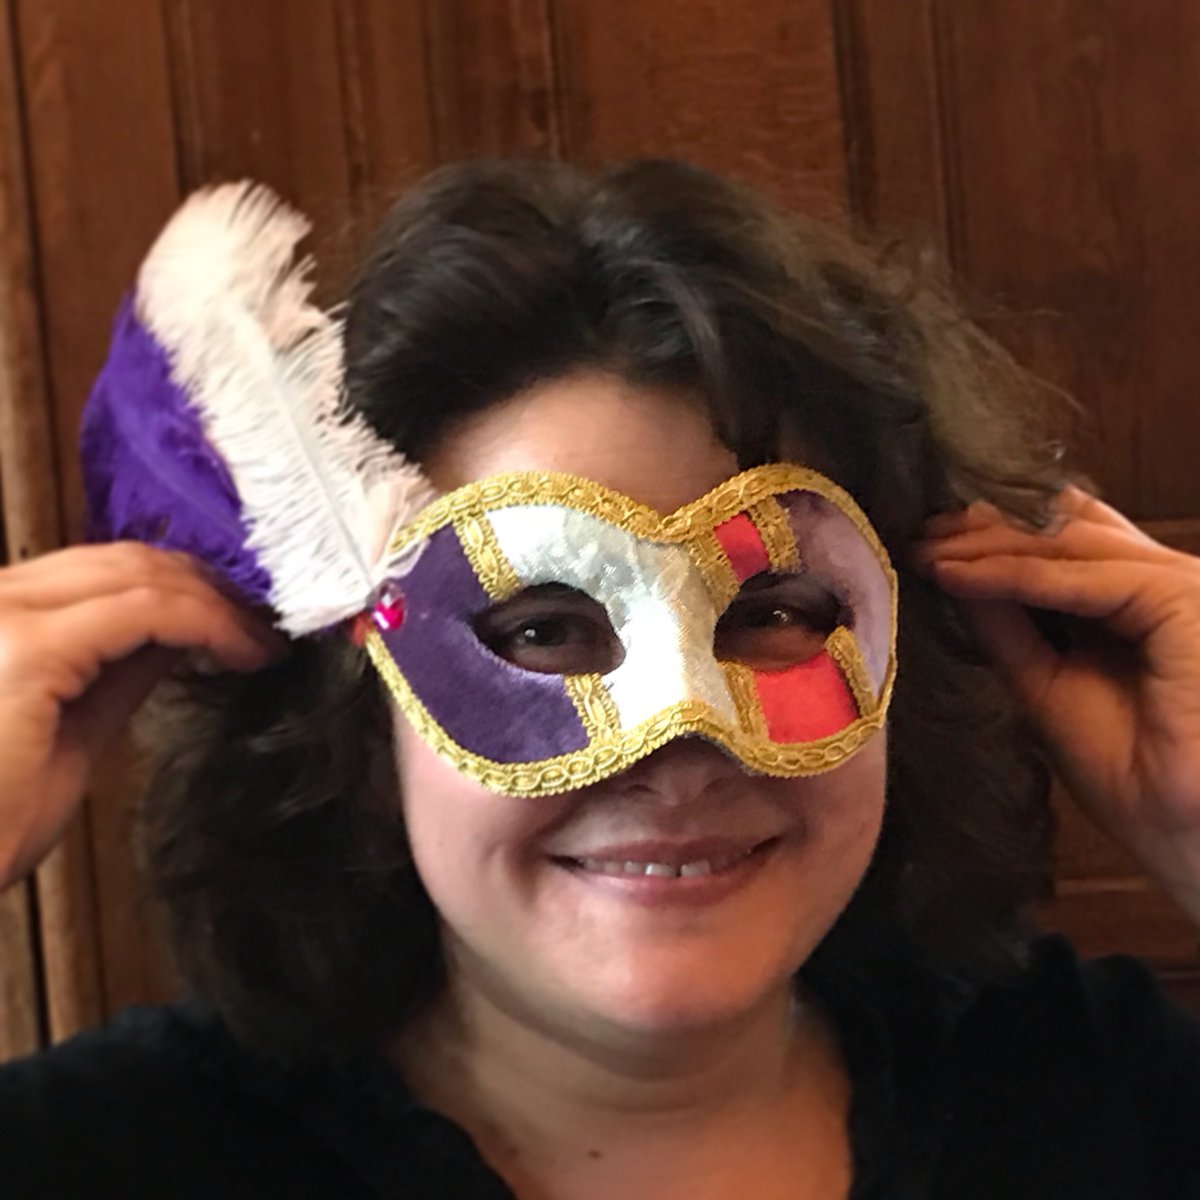 Great workshop yesterday #charltonhouse for the #hornfair2018. Don’t miss your chance to decorate your Venetian mask with fabric @deptforddoesart next Saturday #workshop #deptford #masqueradeparty #craft #maschera #mondaymotivation #greenwich #southeastlondon #ball #masquerade